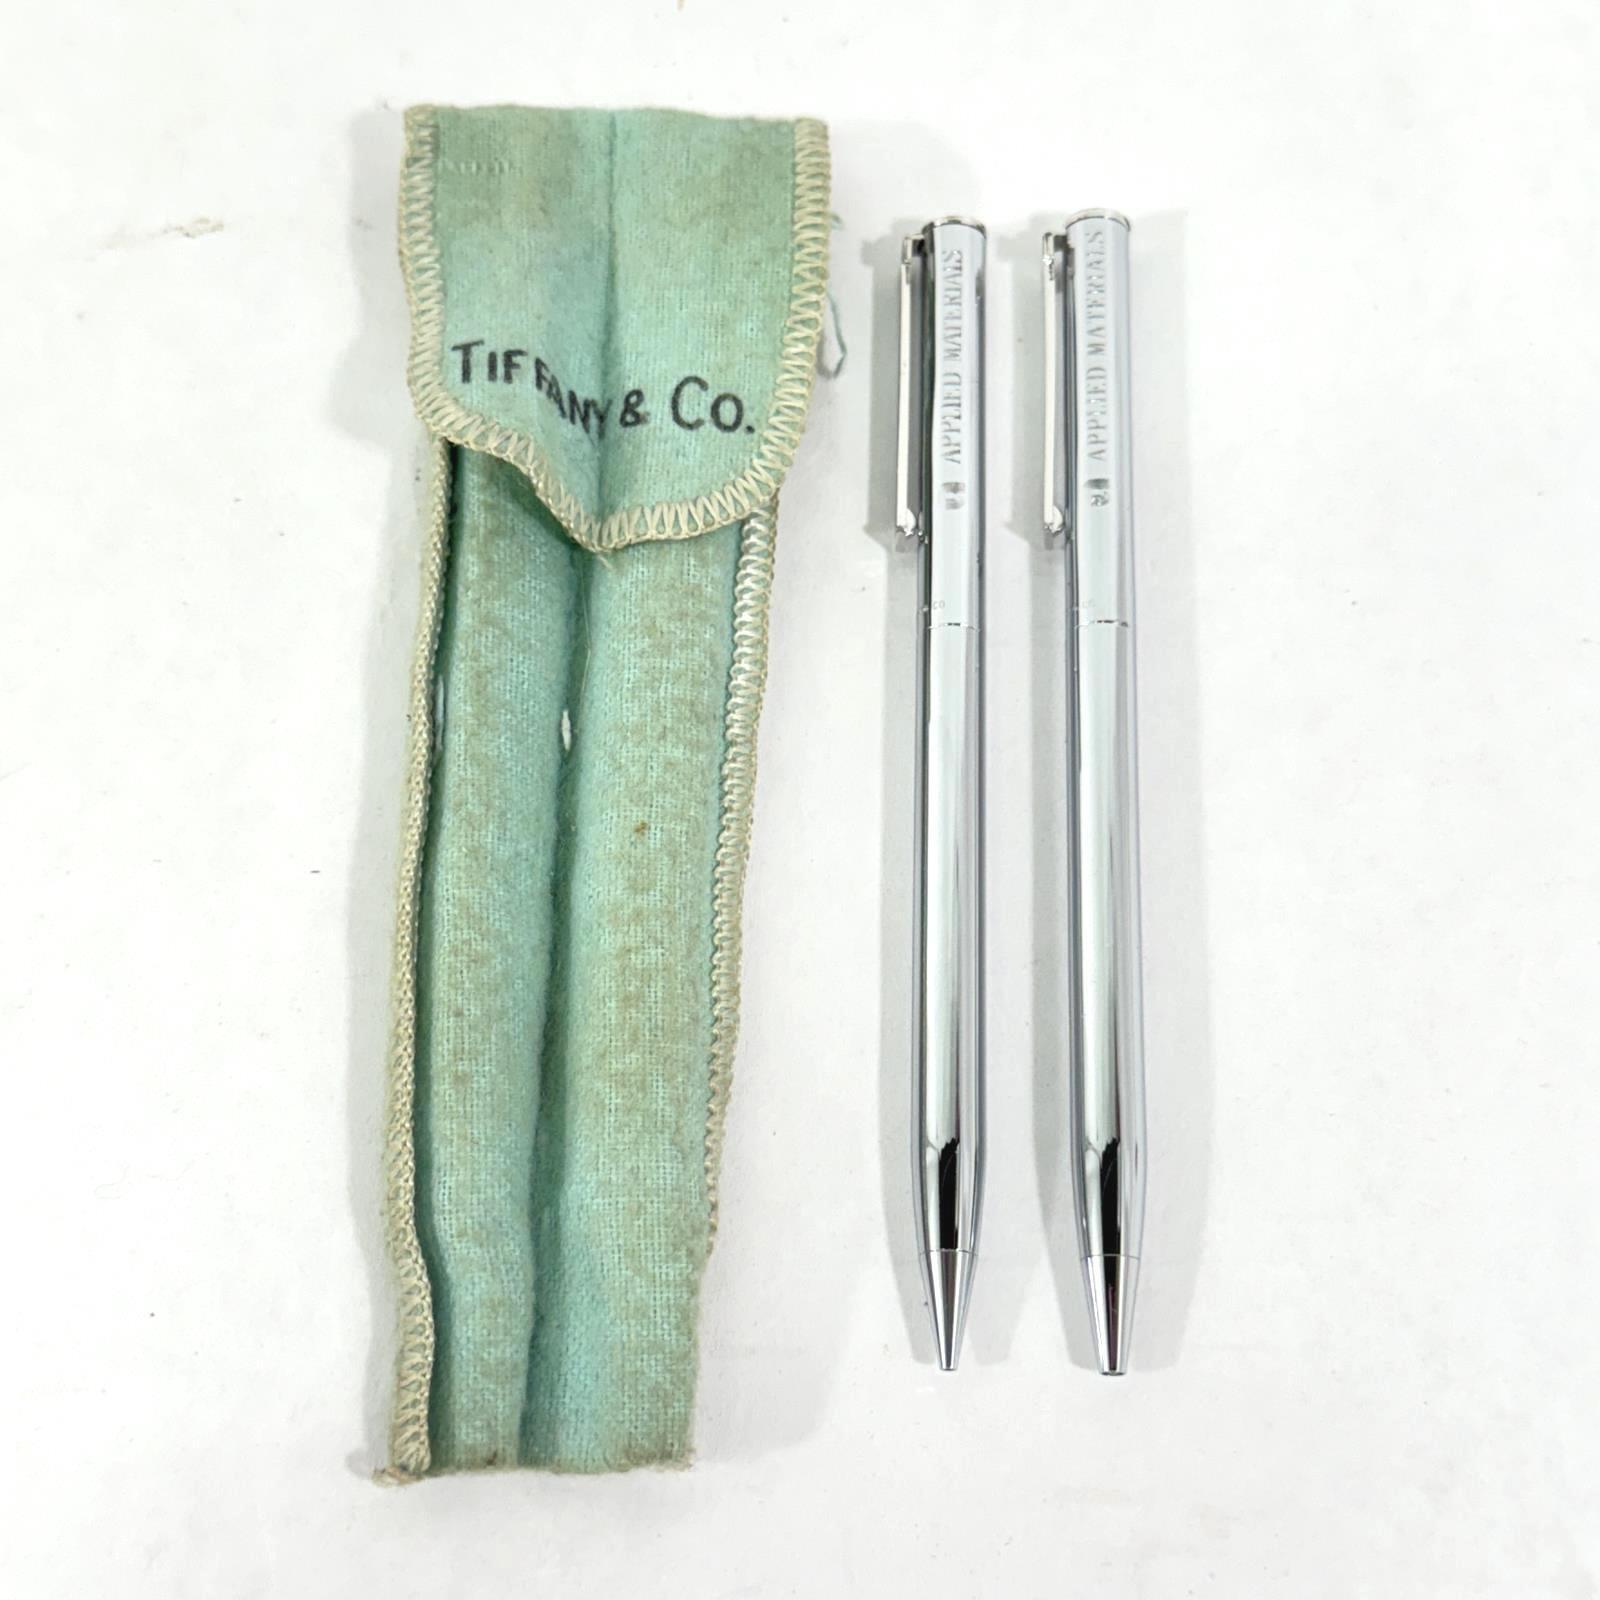 Tiffany & Company Pen Advertising Applied Materials Sterling Pen And Pencil Set